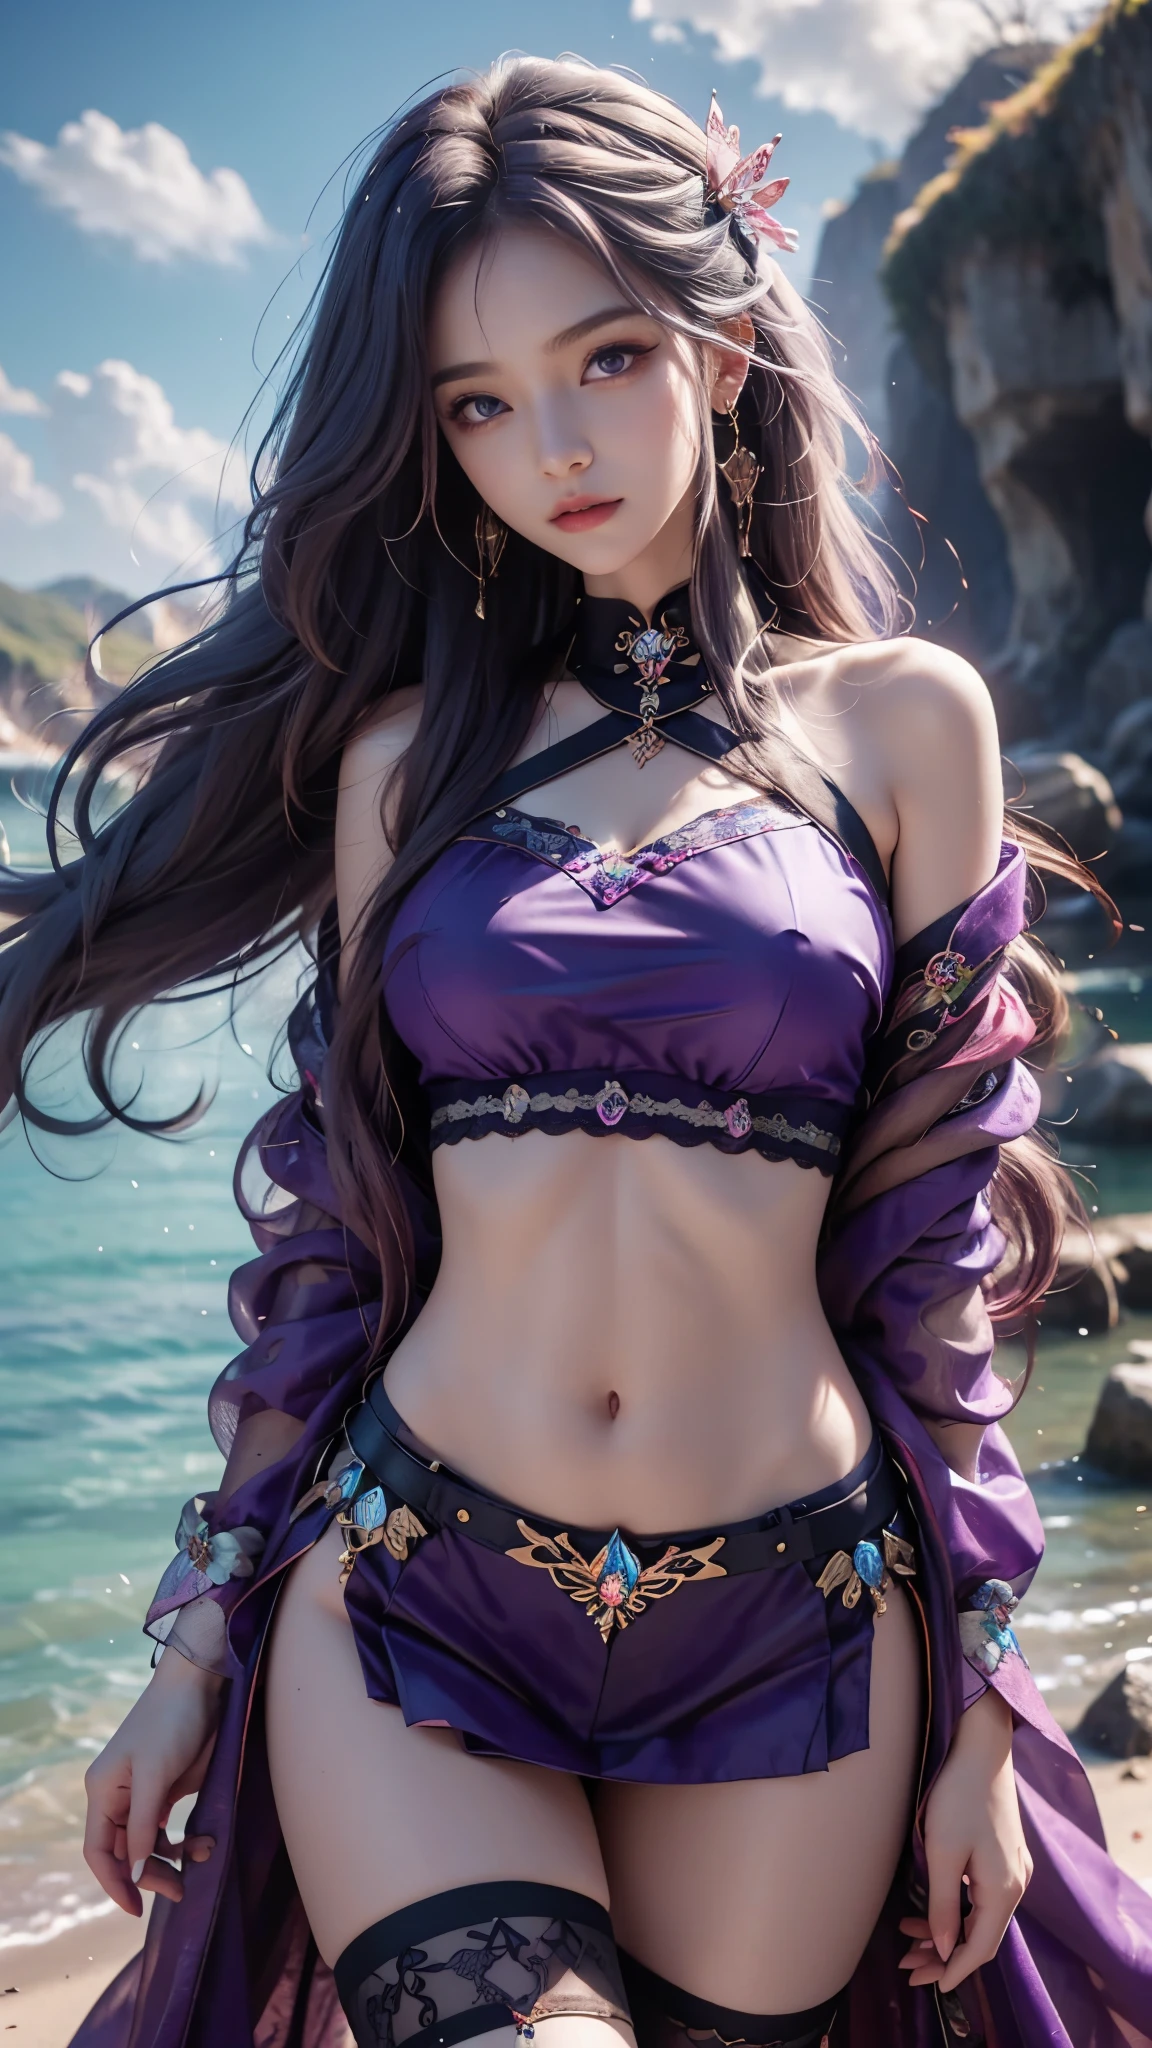 8K, ultra hd, masterpiece, hd colors, 1 girl, perfect face, very long curly hair, detailed eyes, simple clothing, ((purple clothing)), stocking, cryzada lace, sardine, straps, net clothing, loops, bare navel, jwellery, waterside, Realistic scenery, epic scenery, sun rising, evening, clouds, Butterfly, cherry blossom, blowing wind, perfect pose,